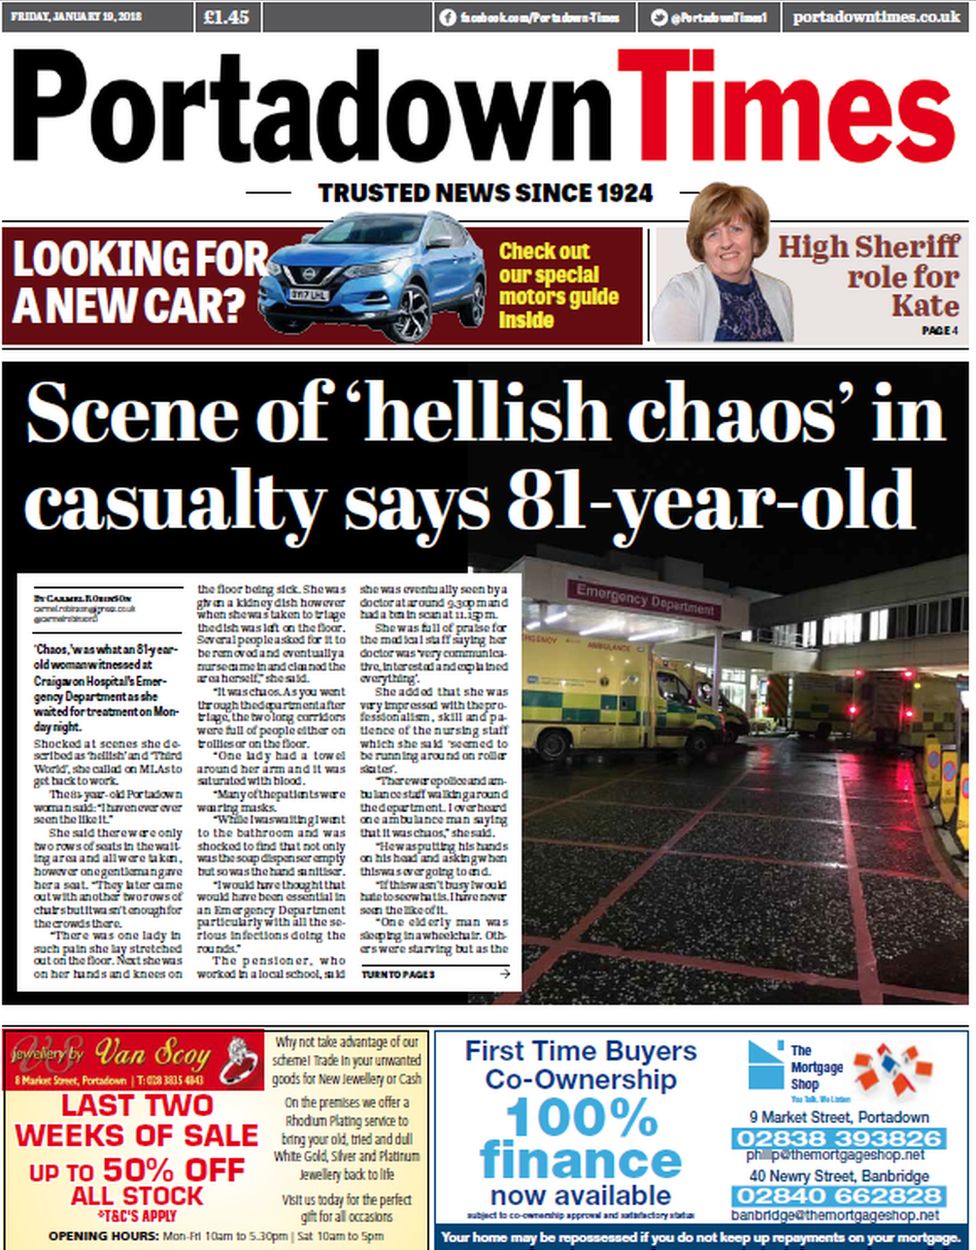 Portadown Times front page